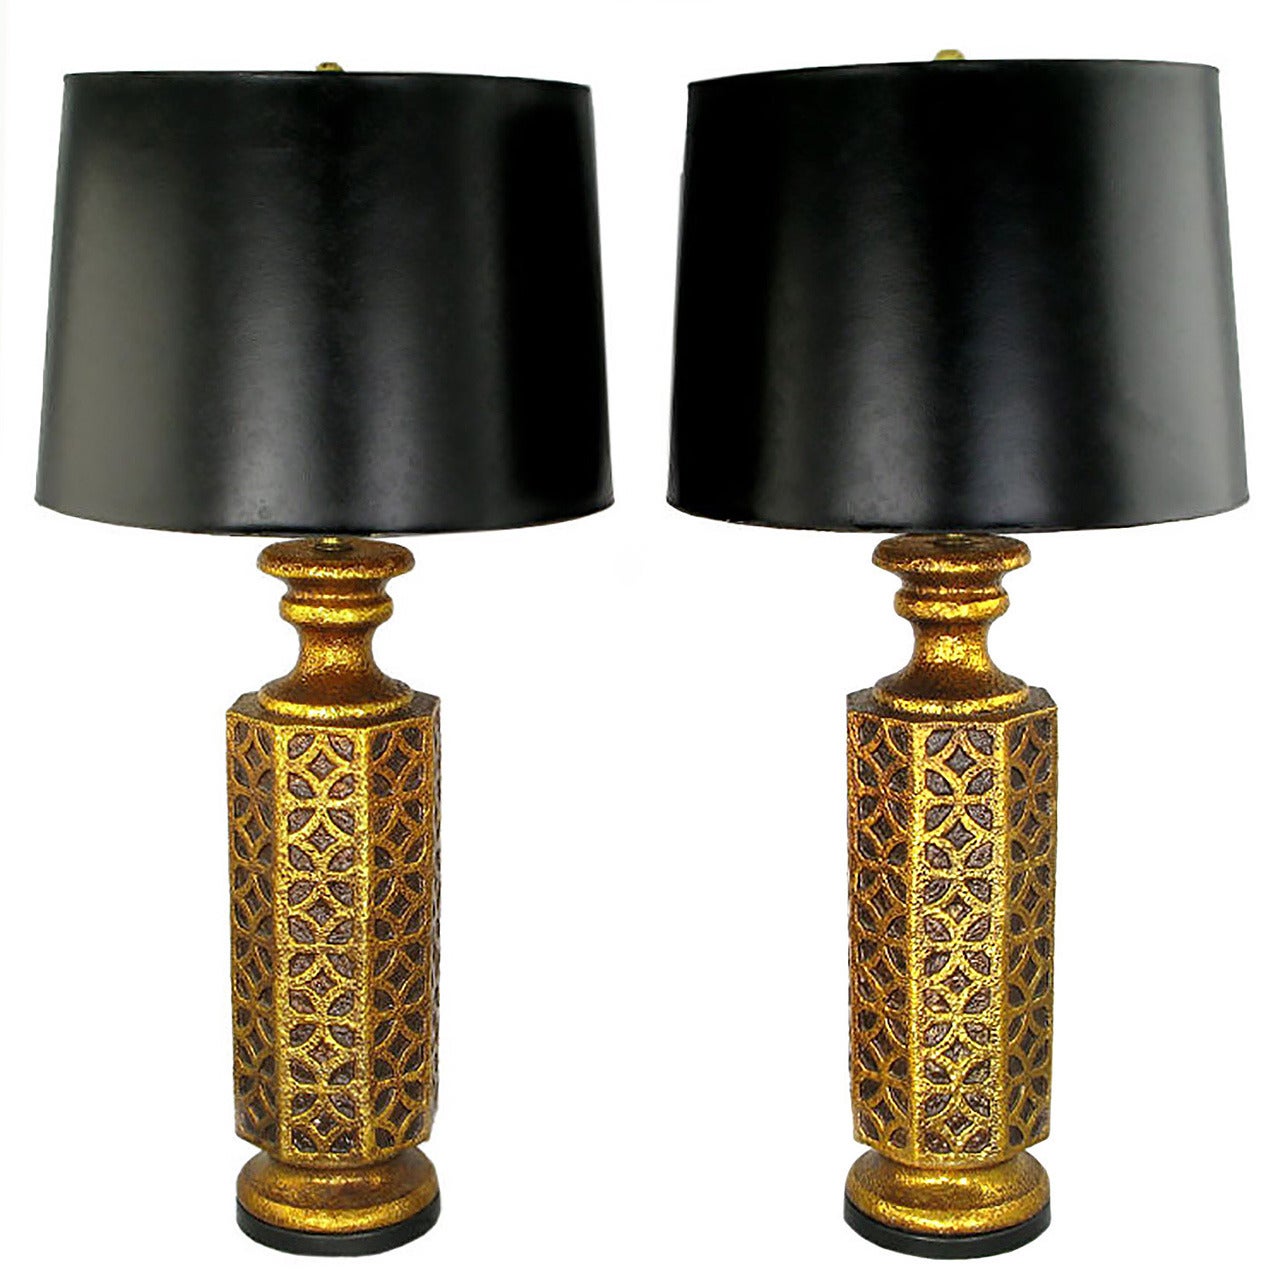 Pair of Moroccan-Style Gilt Arabesques Table Lamps